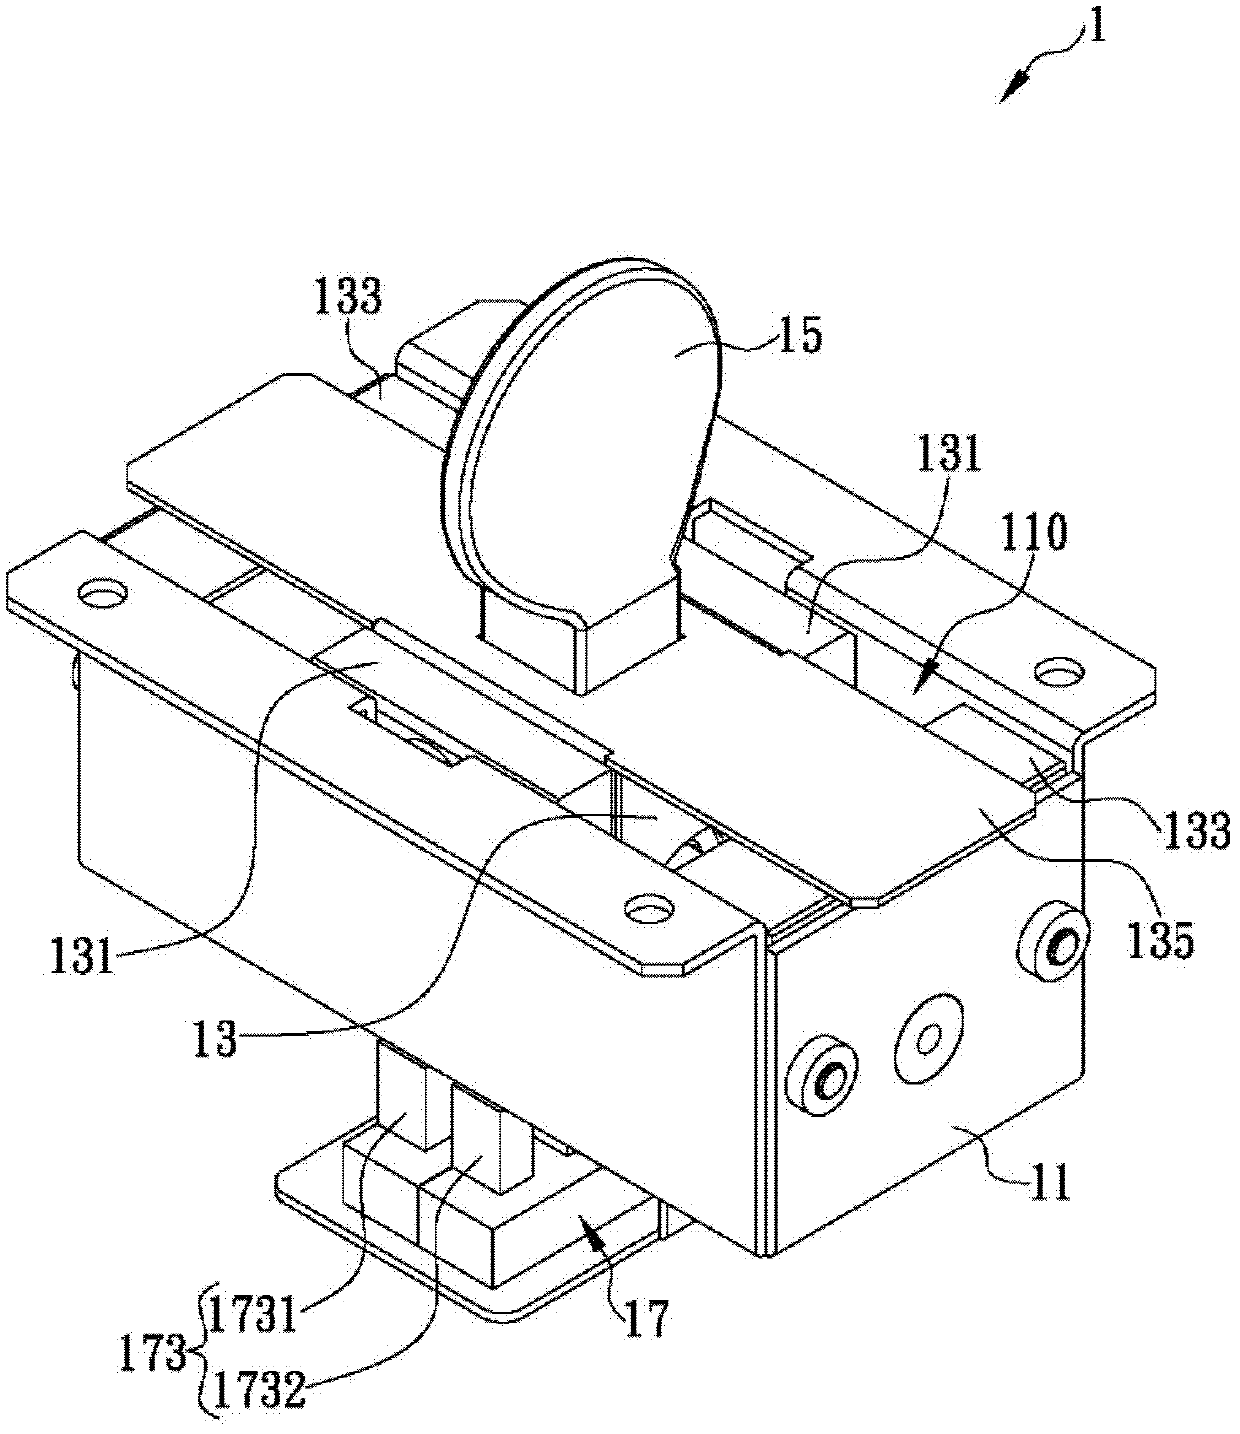 Coin scraping device capable of automatically resetting